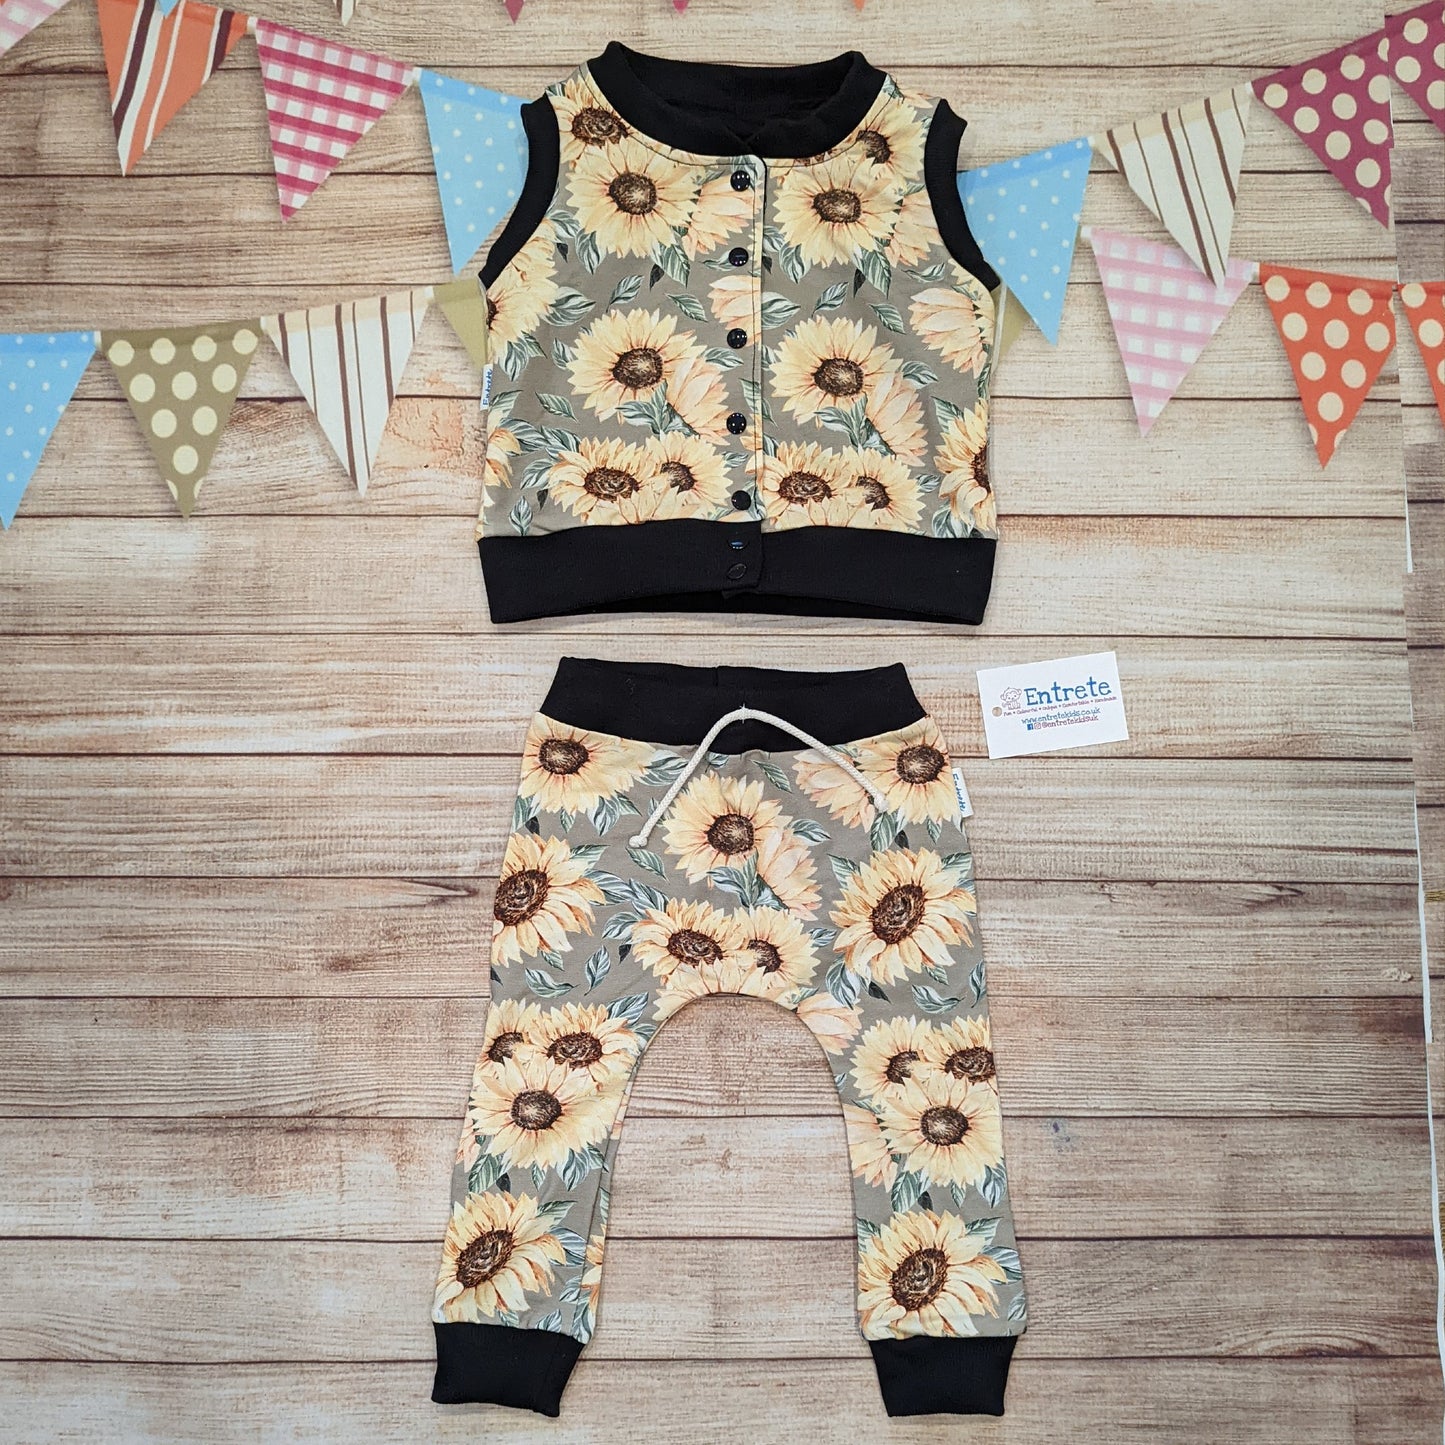 Pretty sunflowers harem joggers, handmade using sunflowers cotton French terry and black cotton ribbing. Shown with a matching sleeveless sweatshirt.